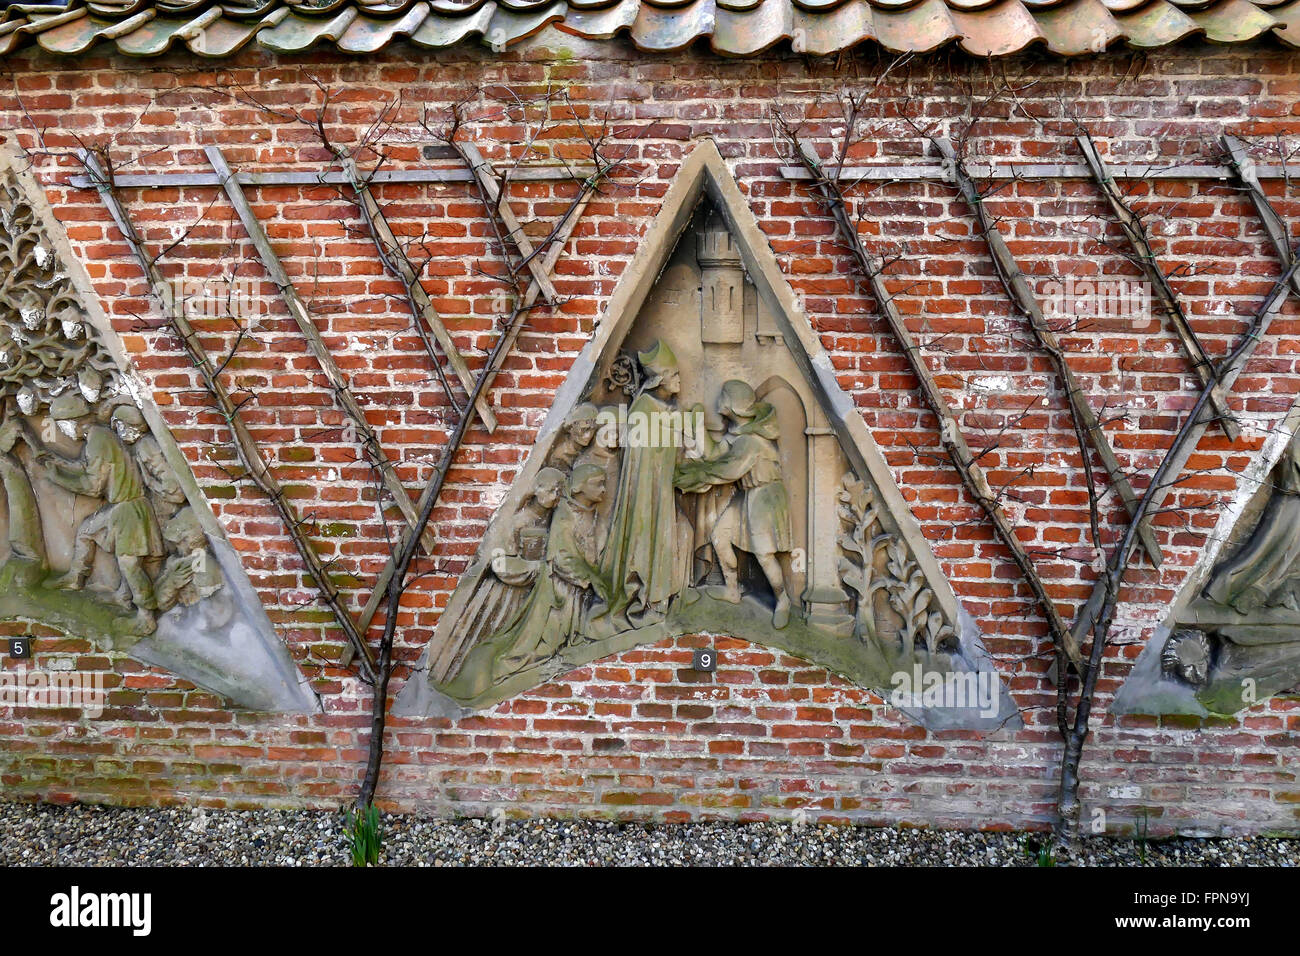 UTRECHT, THE NETHERLANDS - FEBRUARY 27, 2016: Flora's Hof Gothic religious facade in wall. Stock Photo